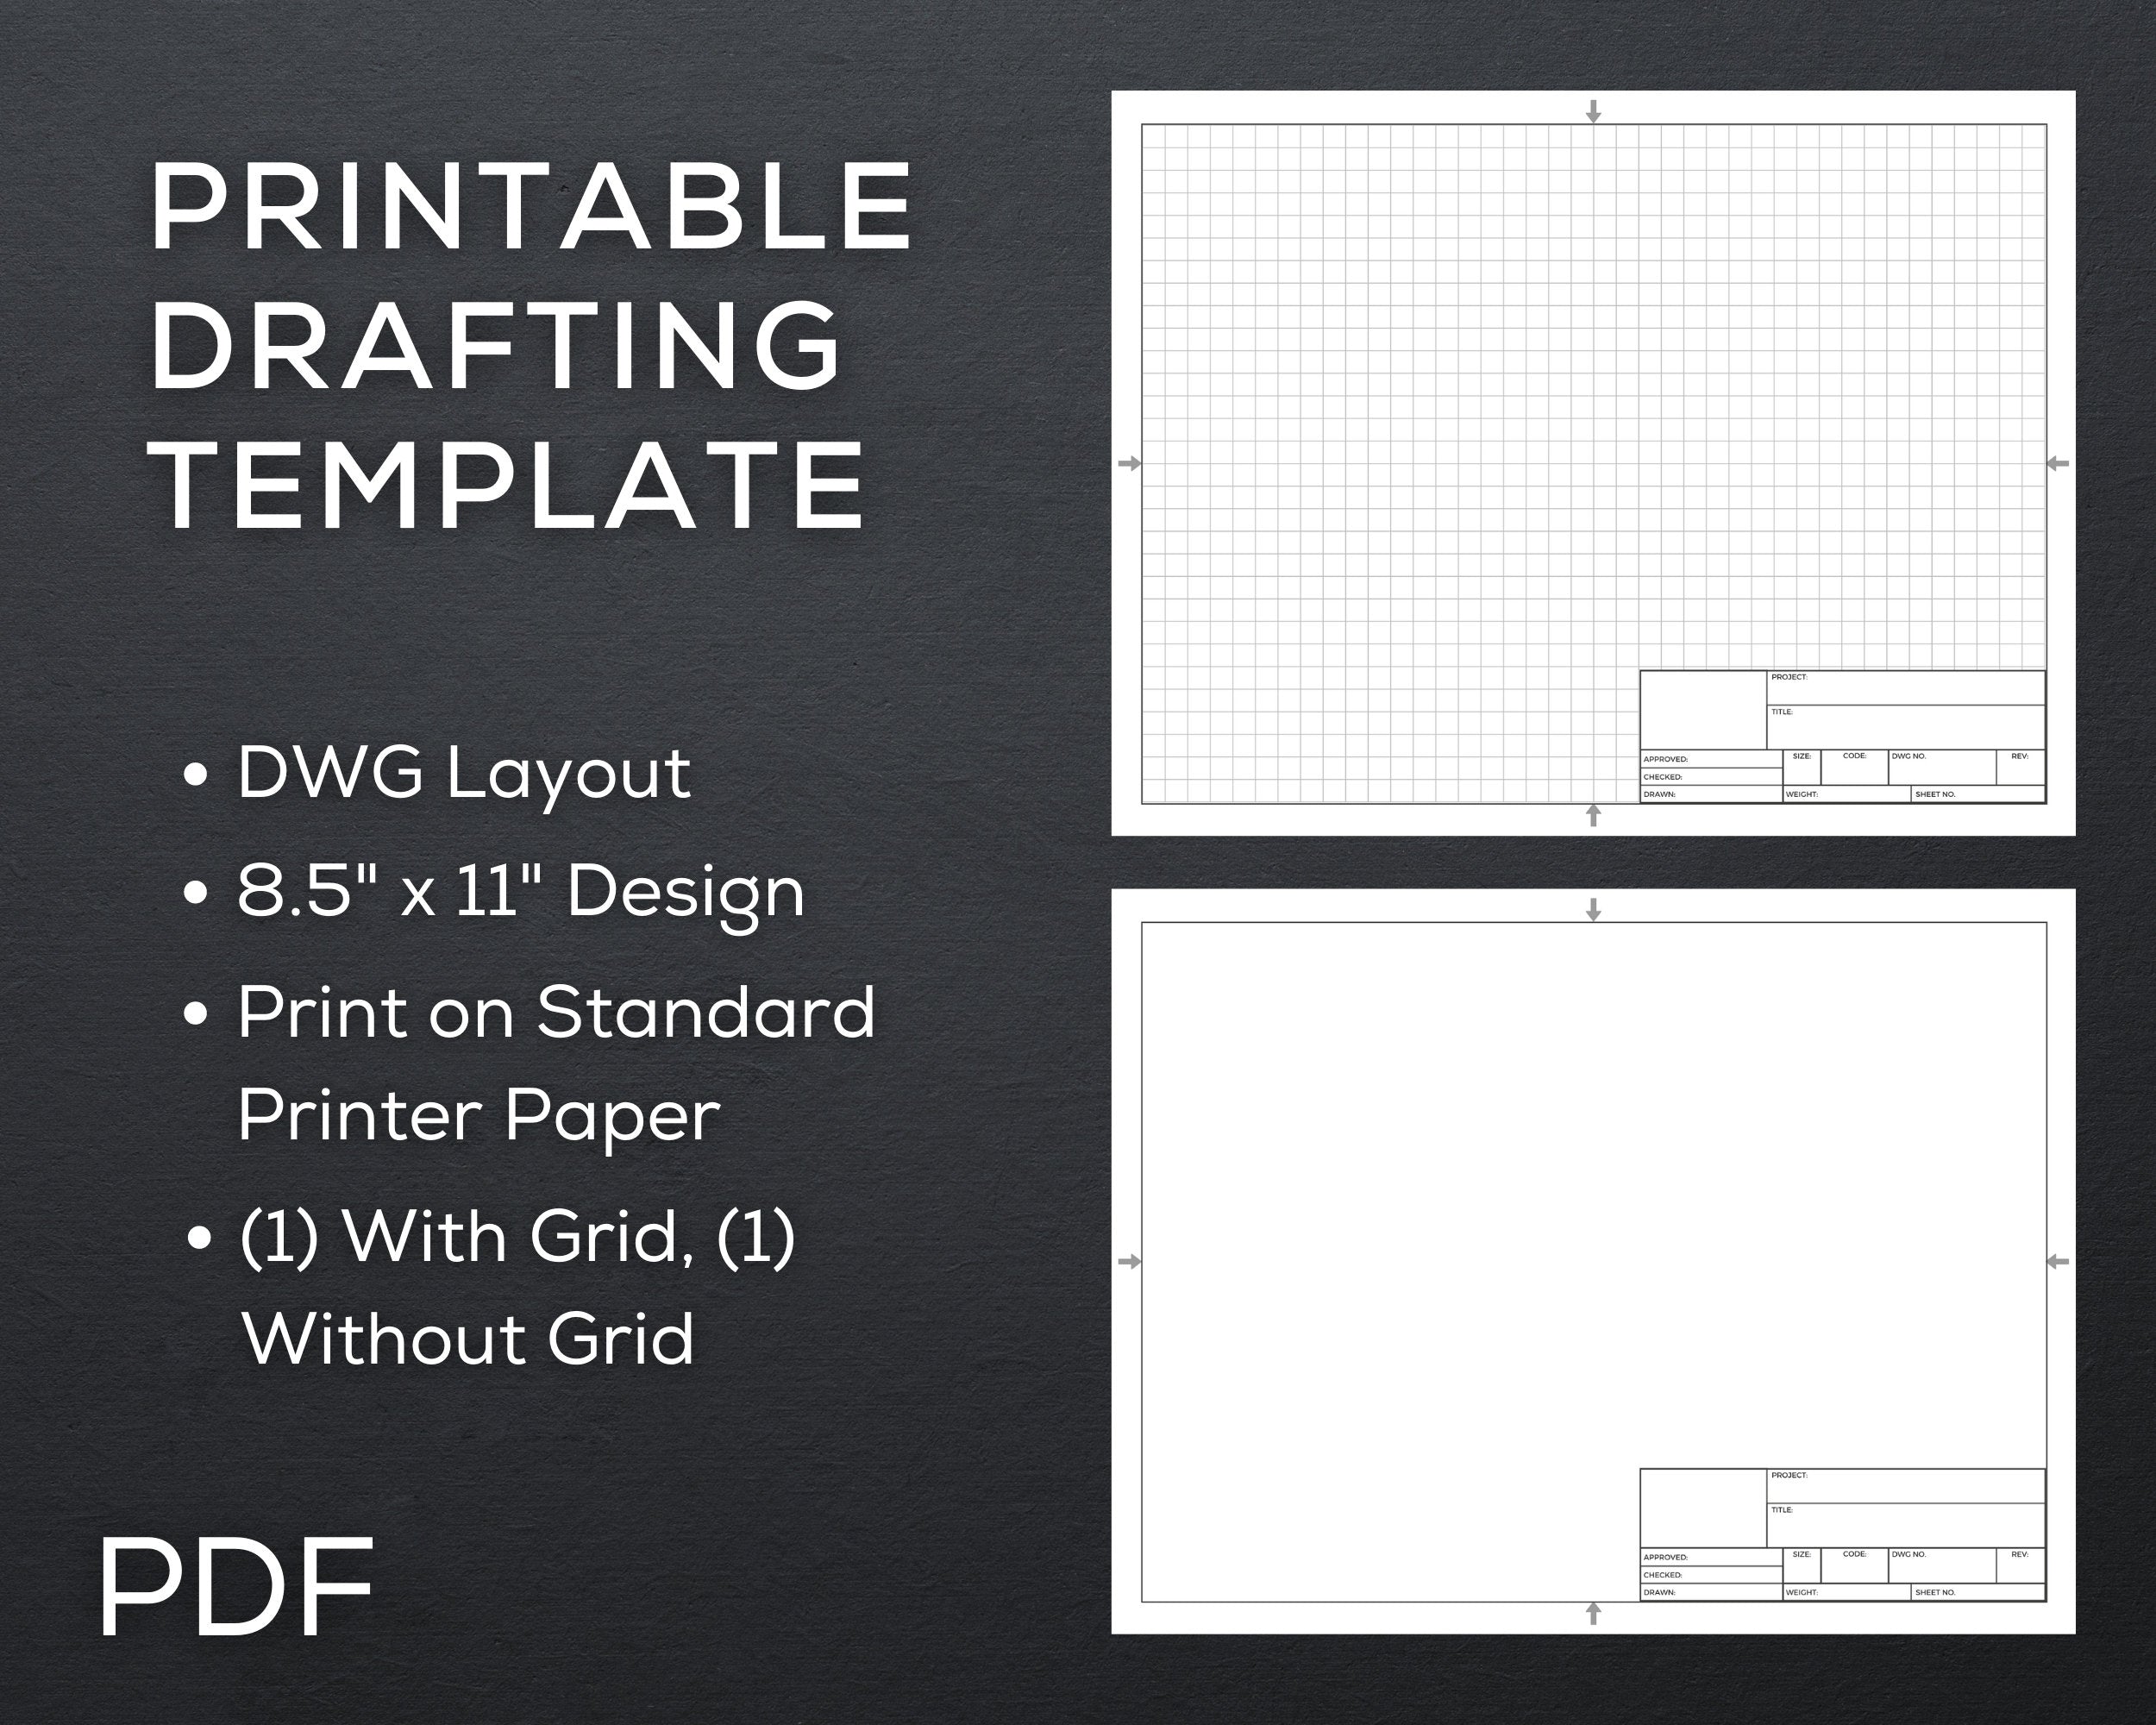 Drafting Template with Sketch Grid, PDF File